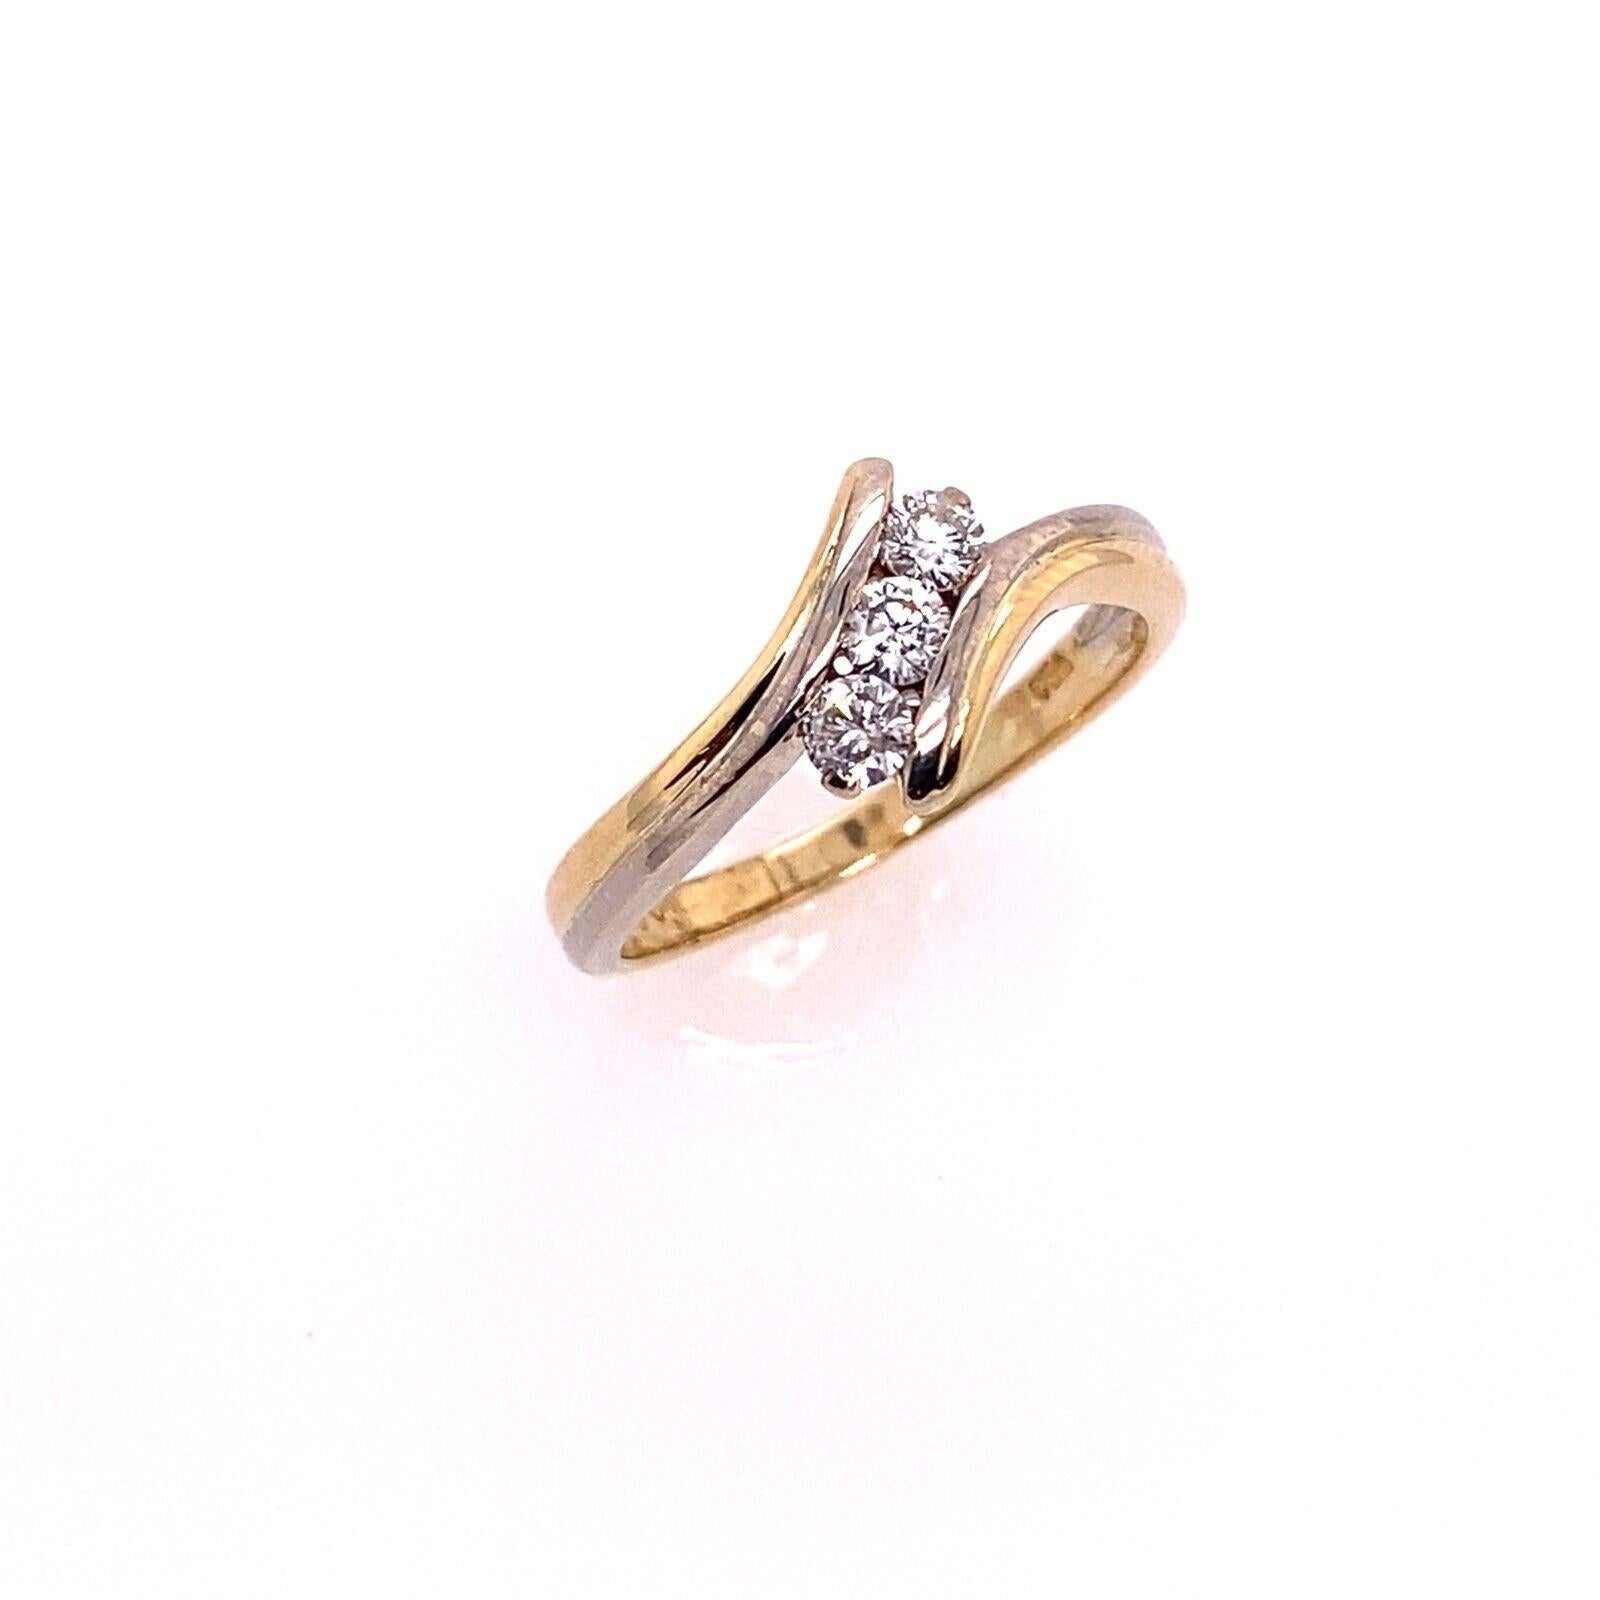 This elegant 3 stone crossover ring is set in 18ct yellow gold setting, with total diamonds of 0.25ct Total Diamond Weight: 0.25ct

Additional Information:
Total Diamond Weight: 0.25ct
Diamond Colour: G/H
Diamond Clarity: Si2
Width of Band: 2